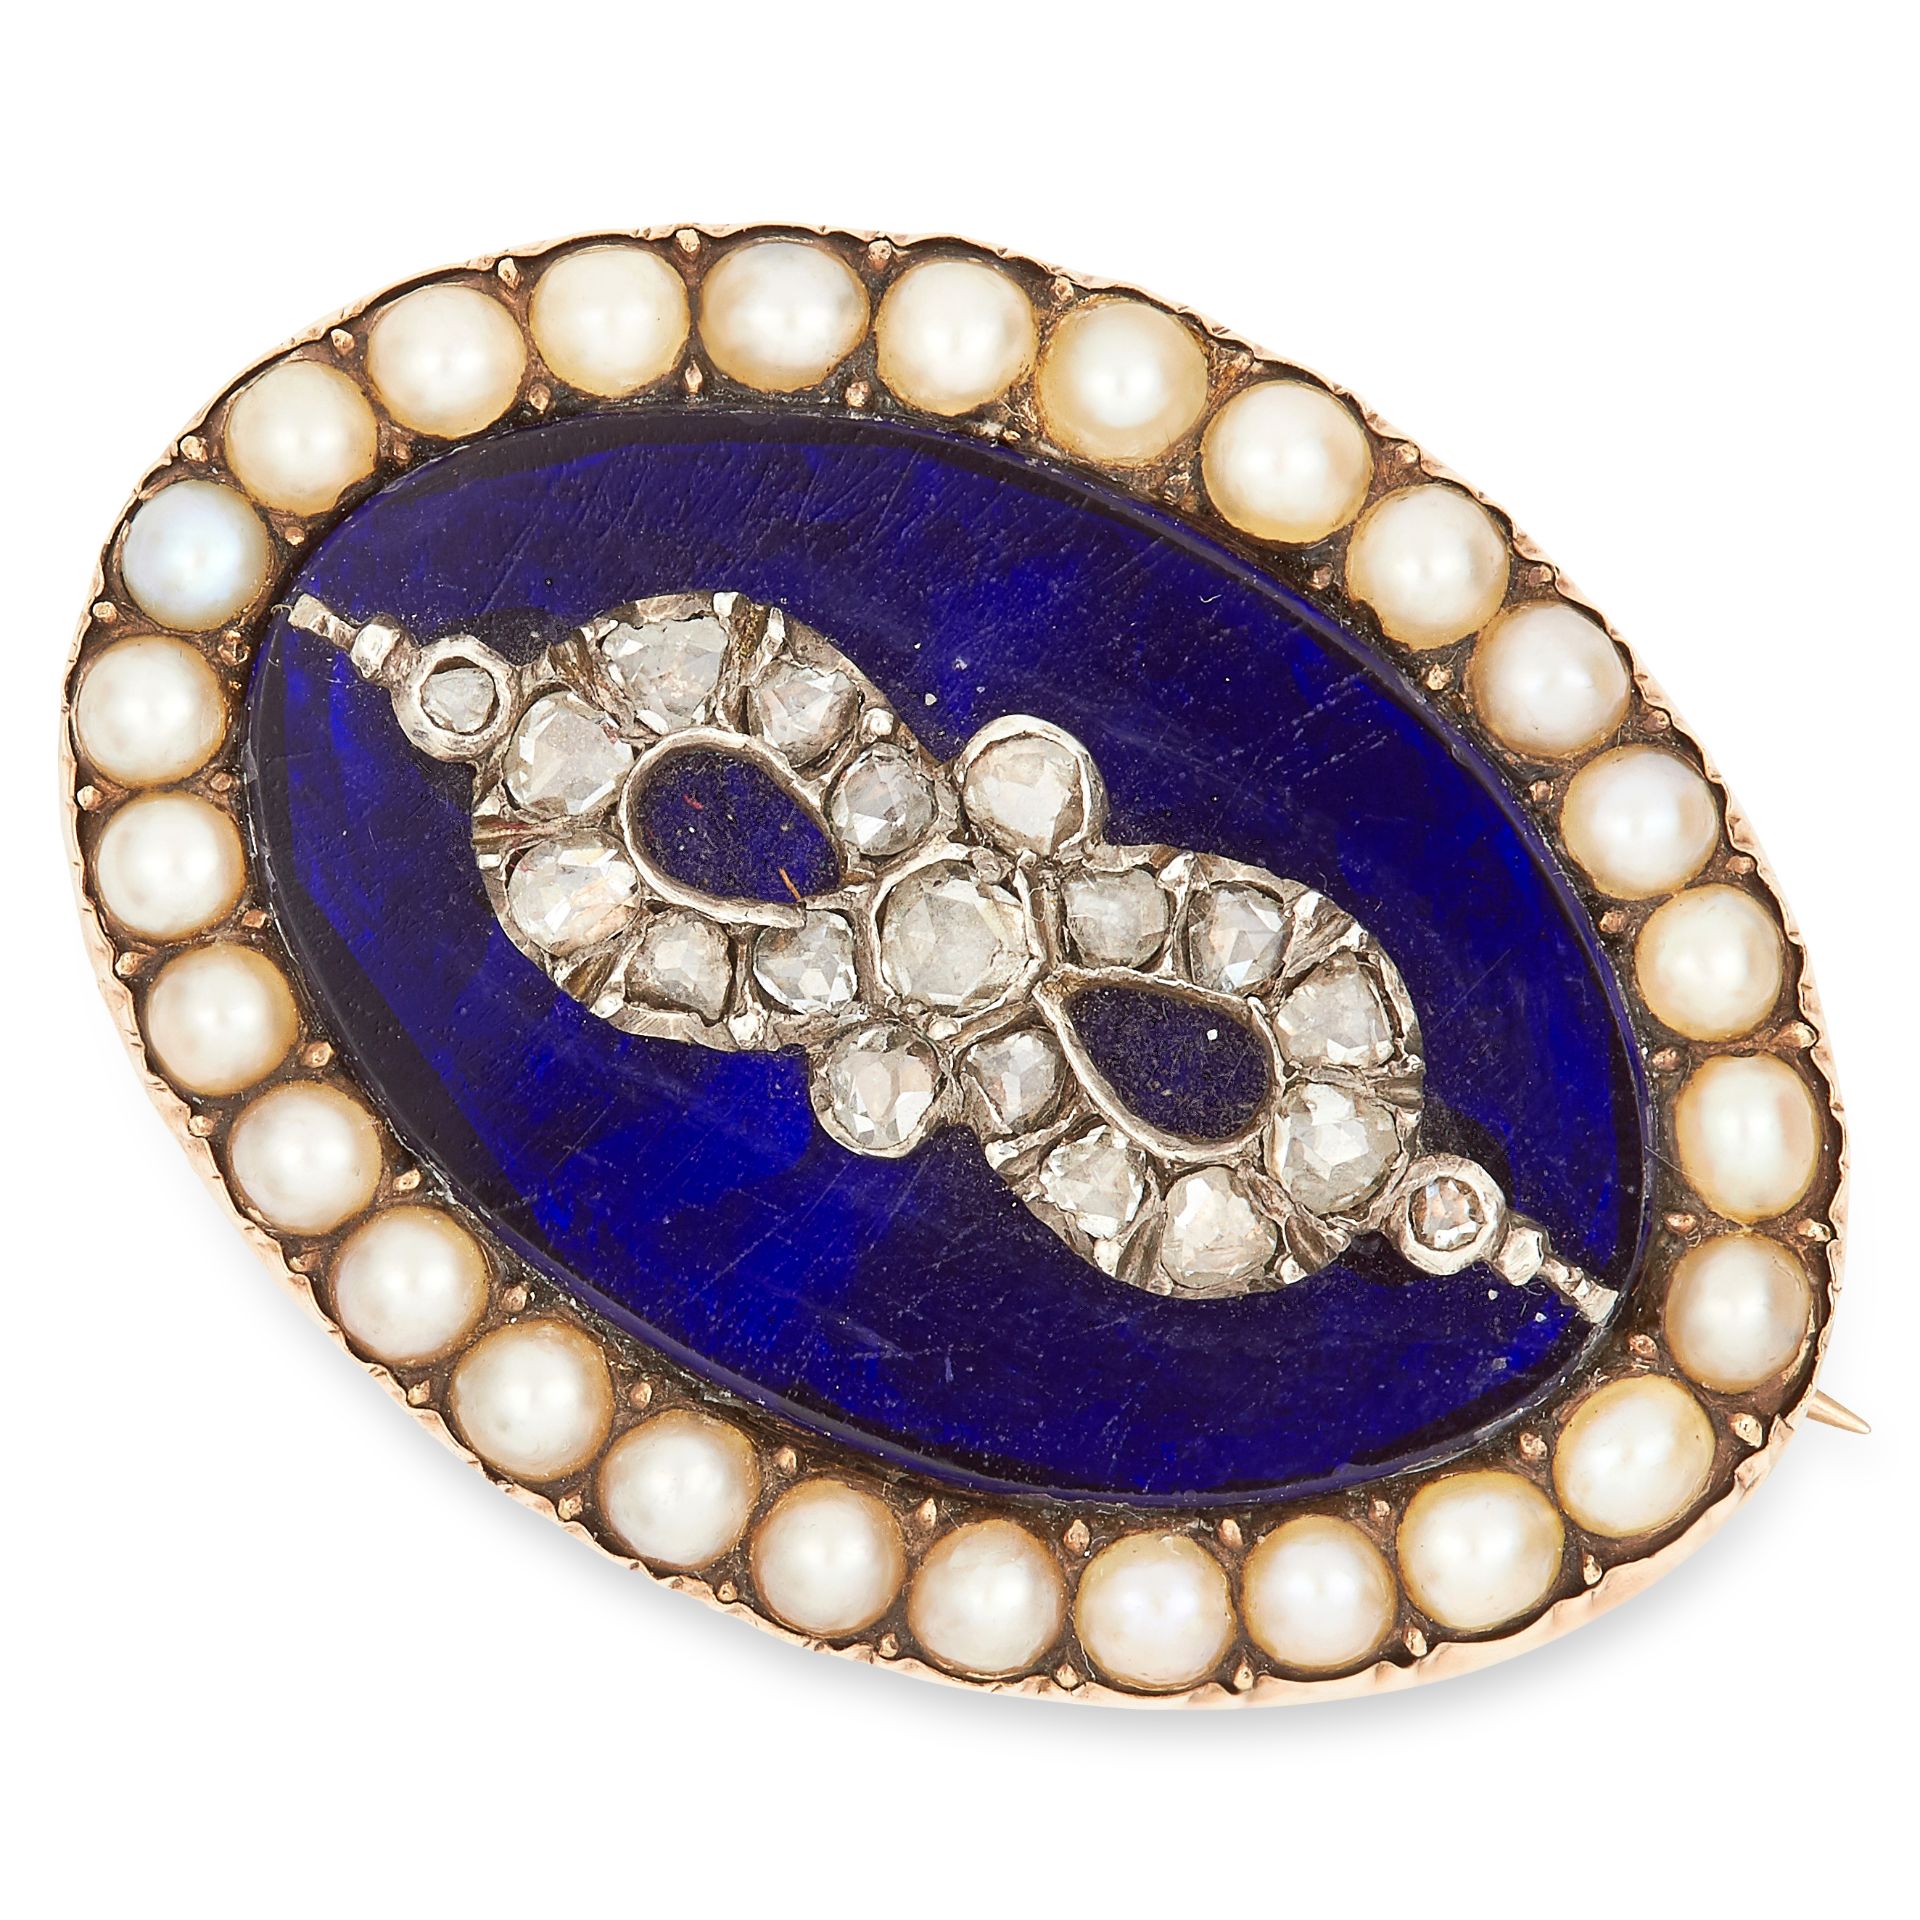 ANTIQUE PEARL, DIAMOND AND ENAMEL BROOCH set with blue enamel, seed pearls and rose cut diamonds,